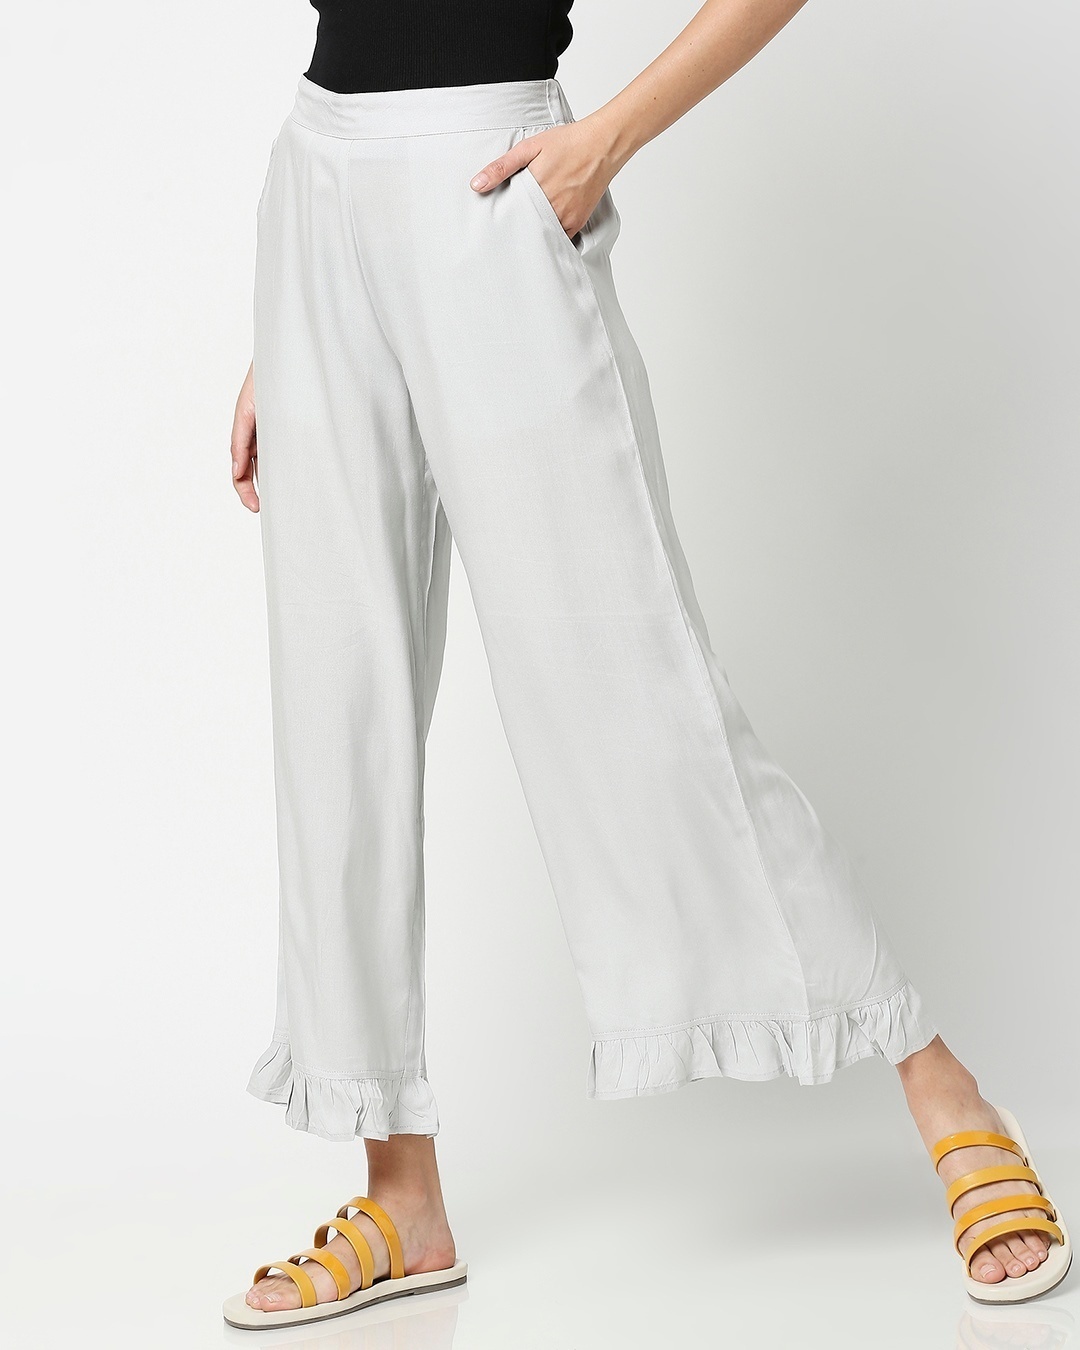 Shop Women's Ethnic Palazzo with Frill at Hem-Back